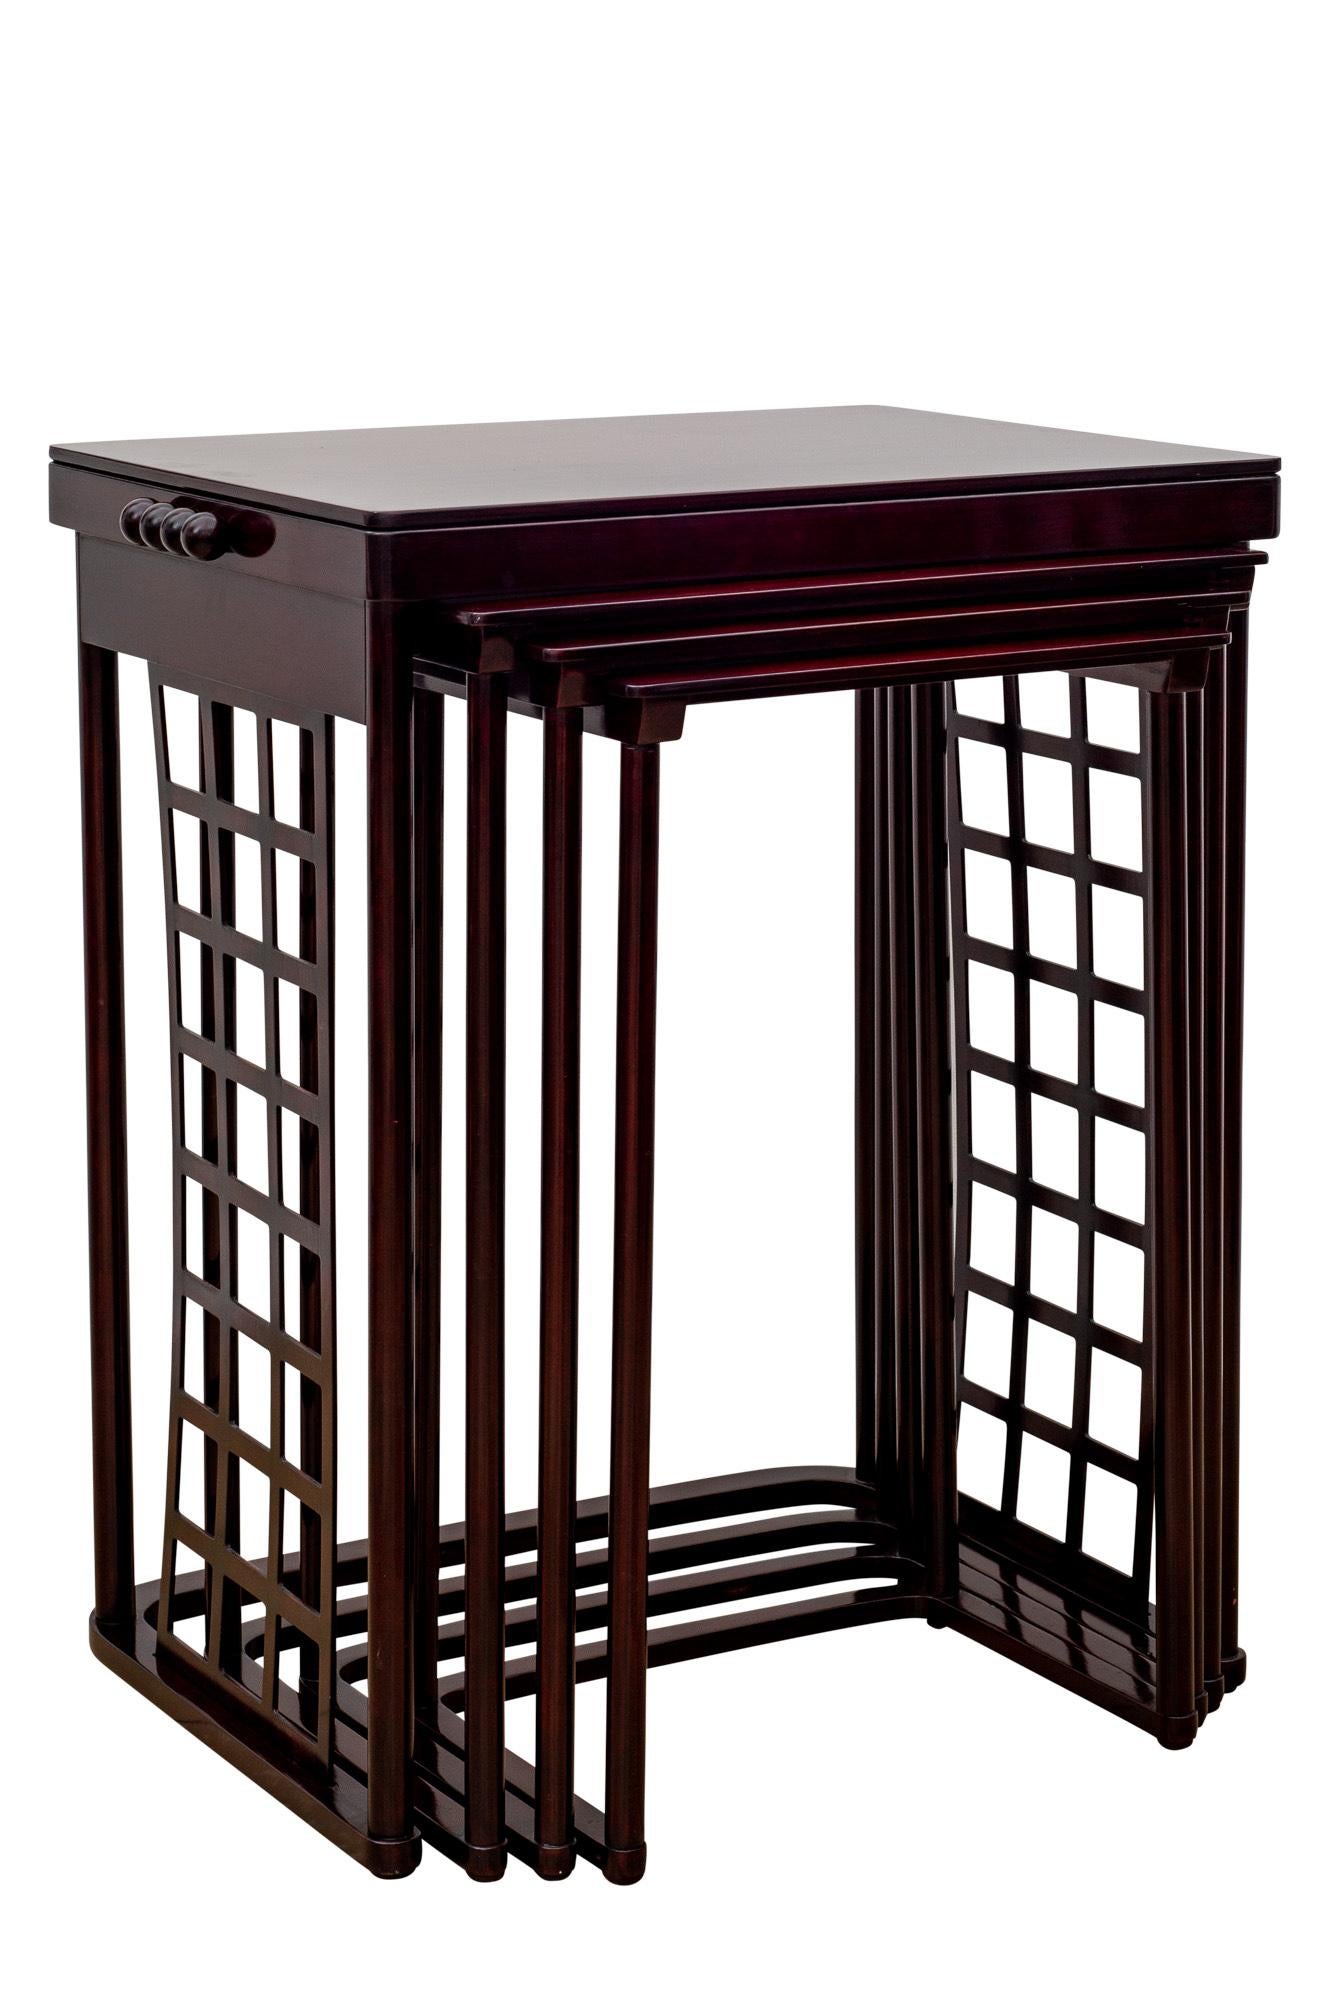 Austrian Jugendstil Nesting Tables with Grid designed by Josef Hoffmann 1905 polished and stained Beechwood - manufactured by Jacob & Josef Kohn model no.988

1905 was one of the most important years for the Wiener Werkstatte. The two designers